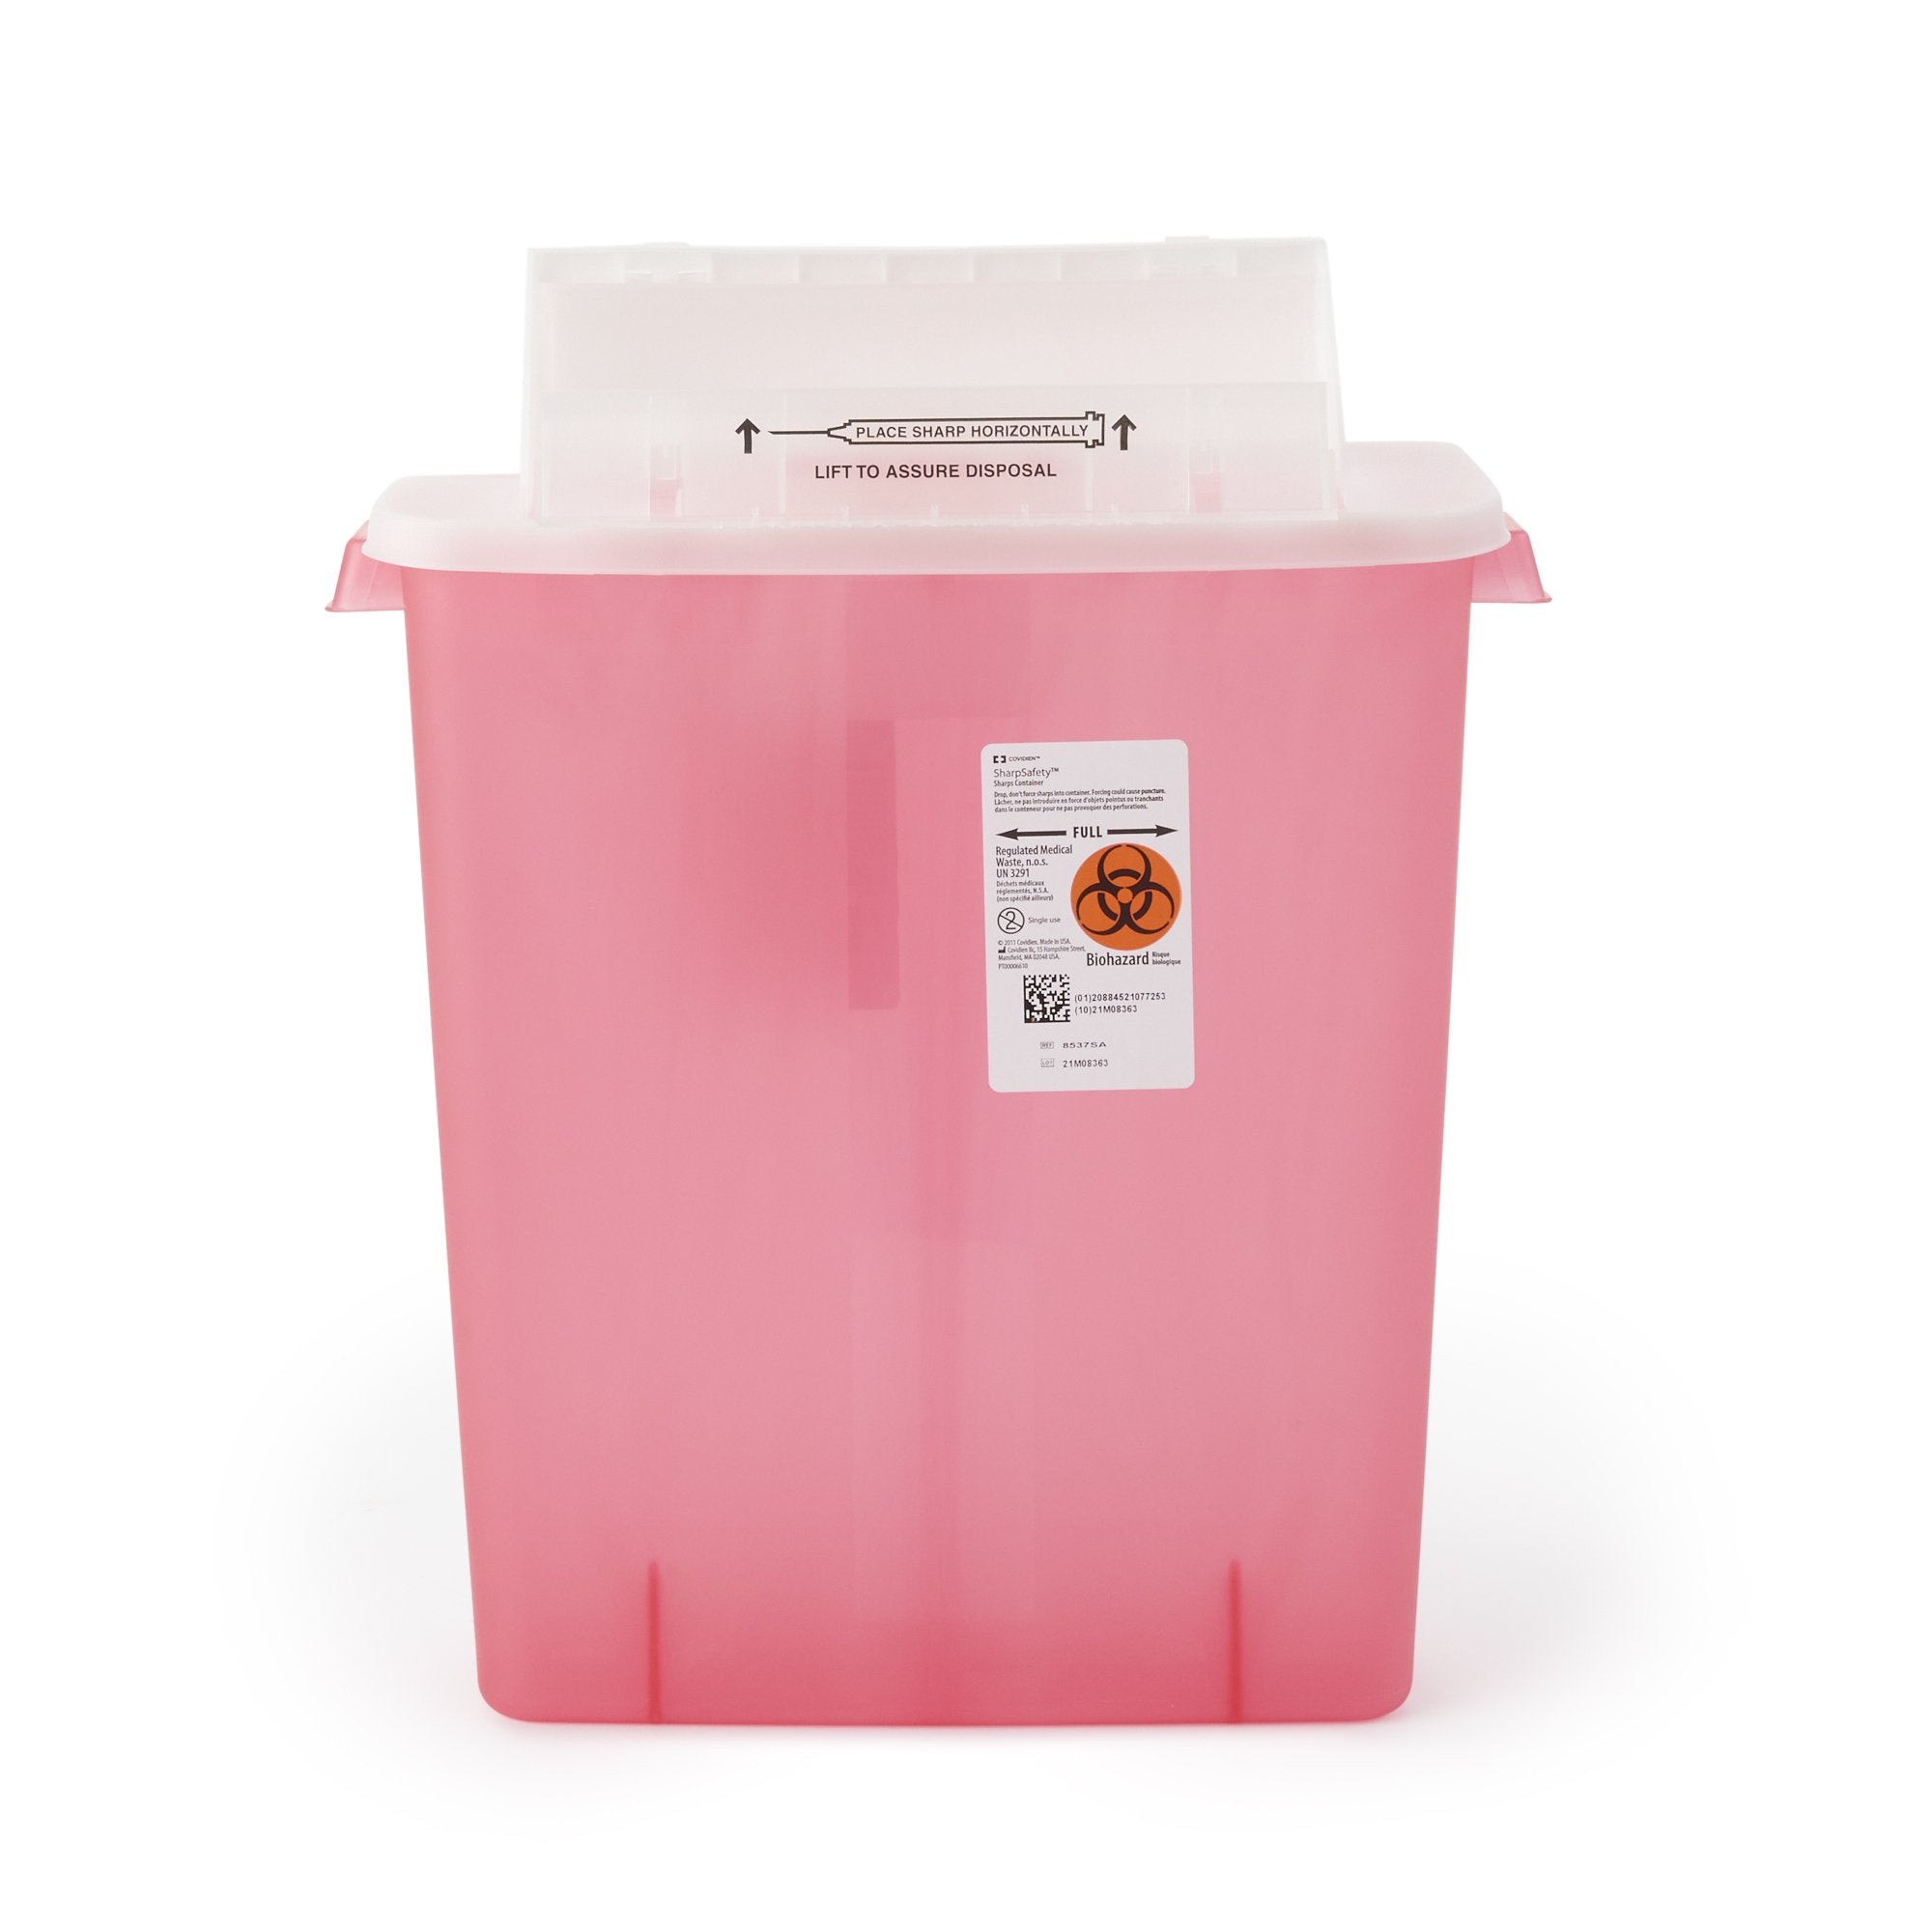 Sharps Container SharpStar™ In-Room™ Translucent Red Base 16-1/2 H X 13-3/4 W X 6 D Inch Horizontal Entry 3 Gallon